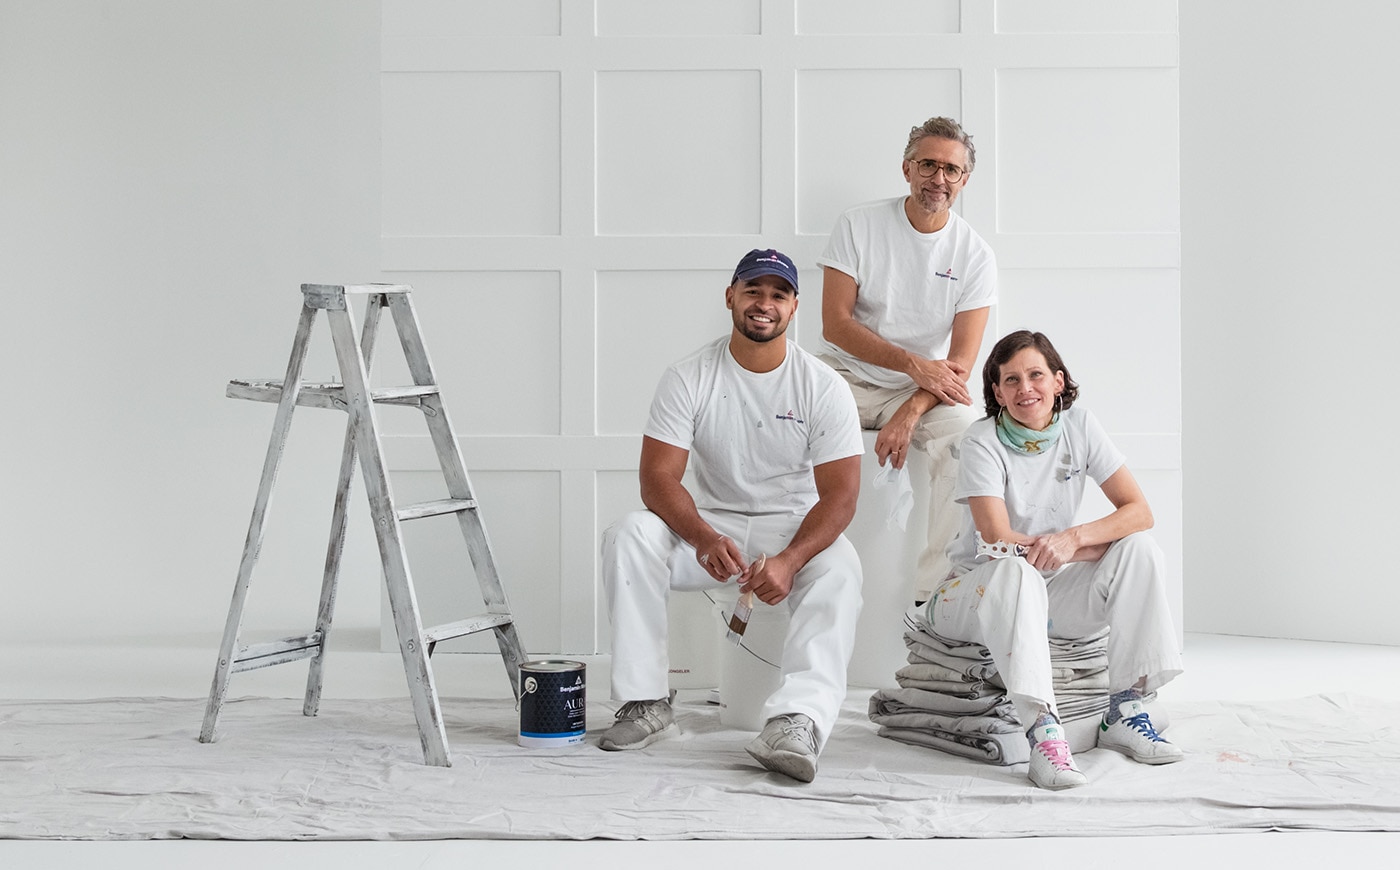 Two male and one female painting contractors sit on a drop cloth on the floor of an industrial-looking, all-white room with black window trim.